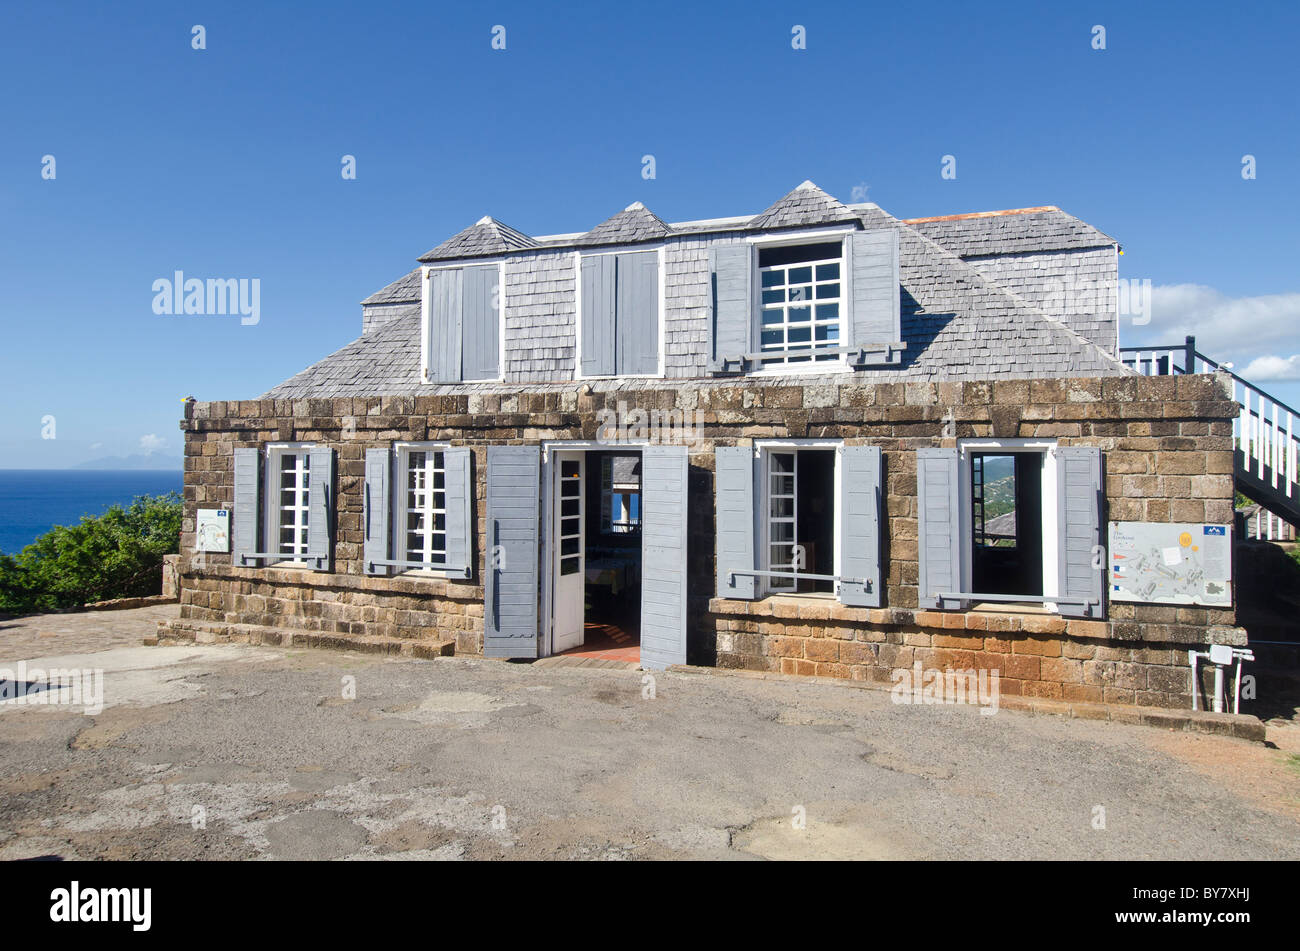 shirley heights lookout restaurant and bar, antigua, historic building at old military complex Stock Photo